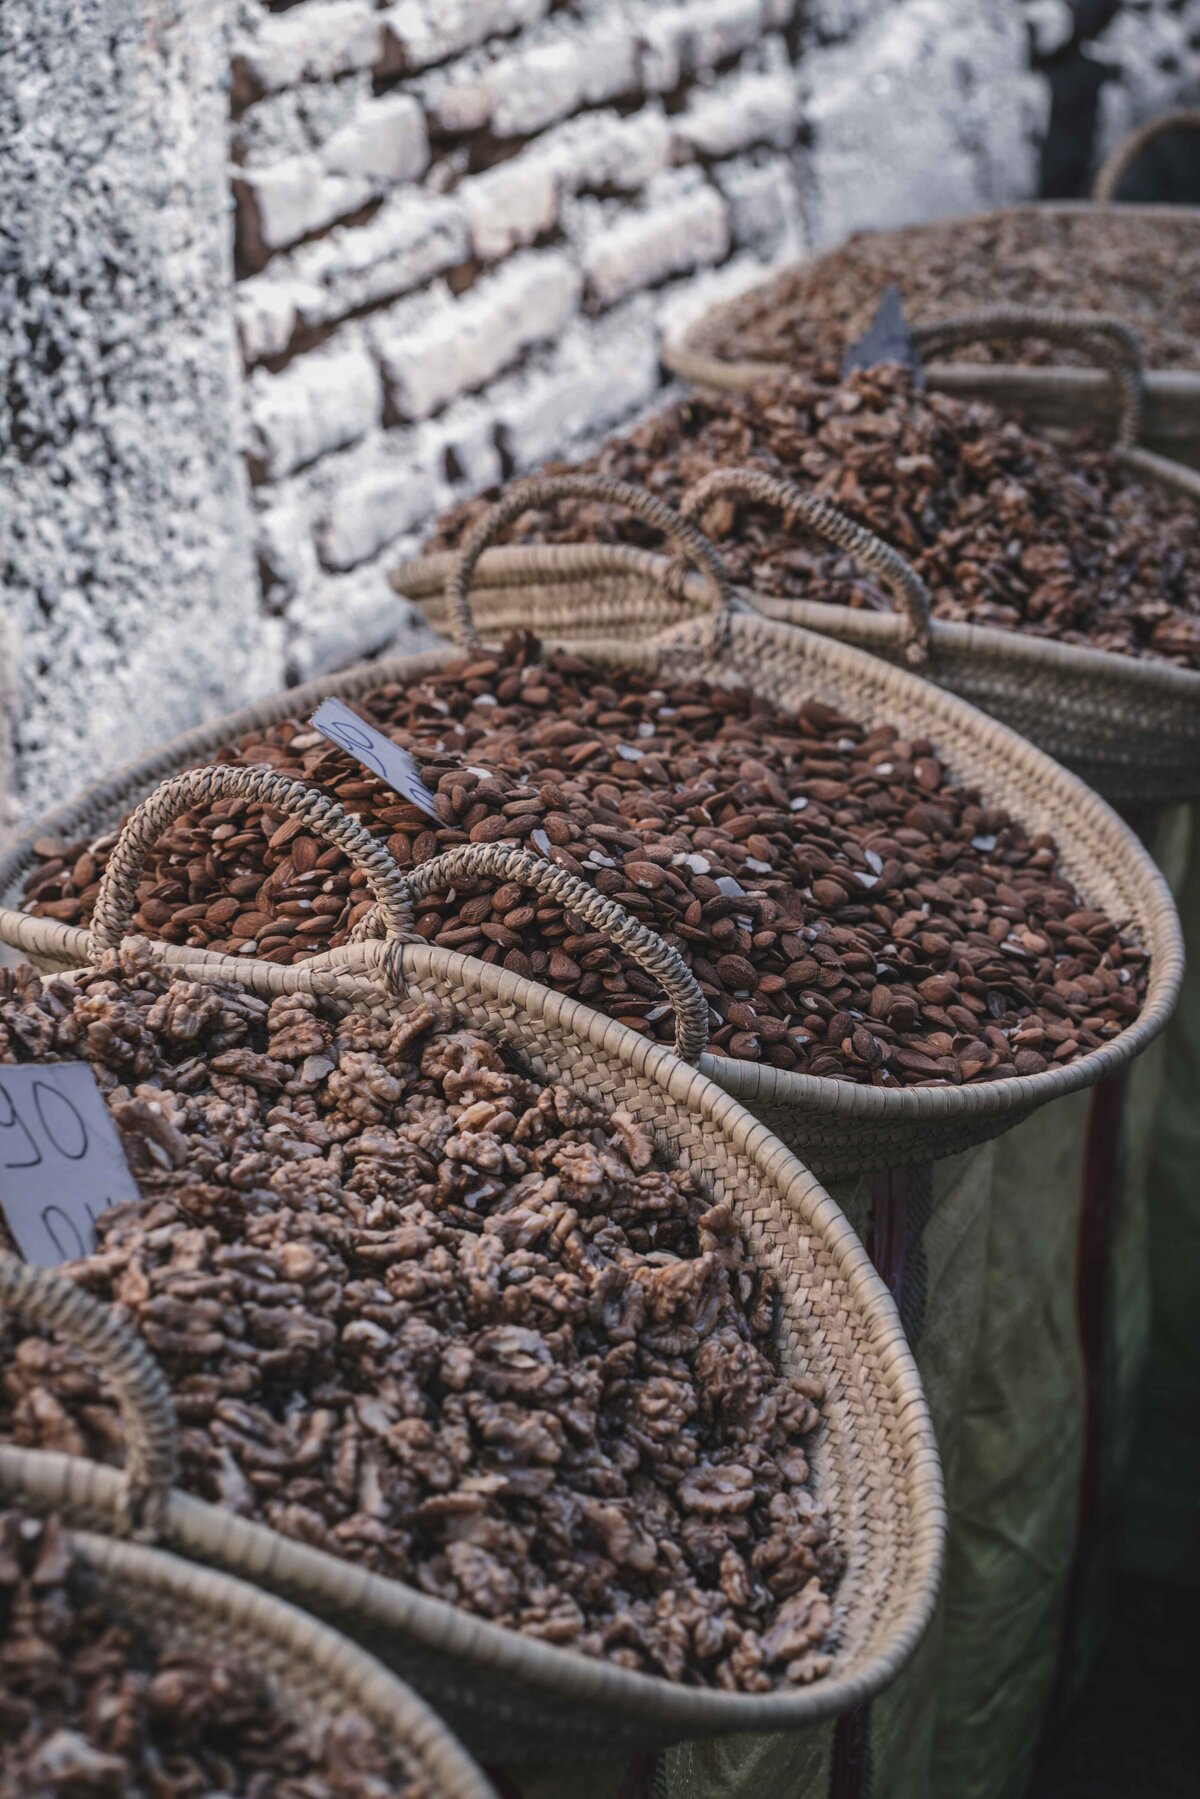 Nuts scene in the Souks of the Old Town of Marrakech